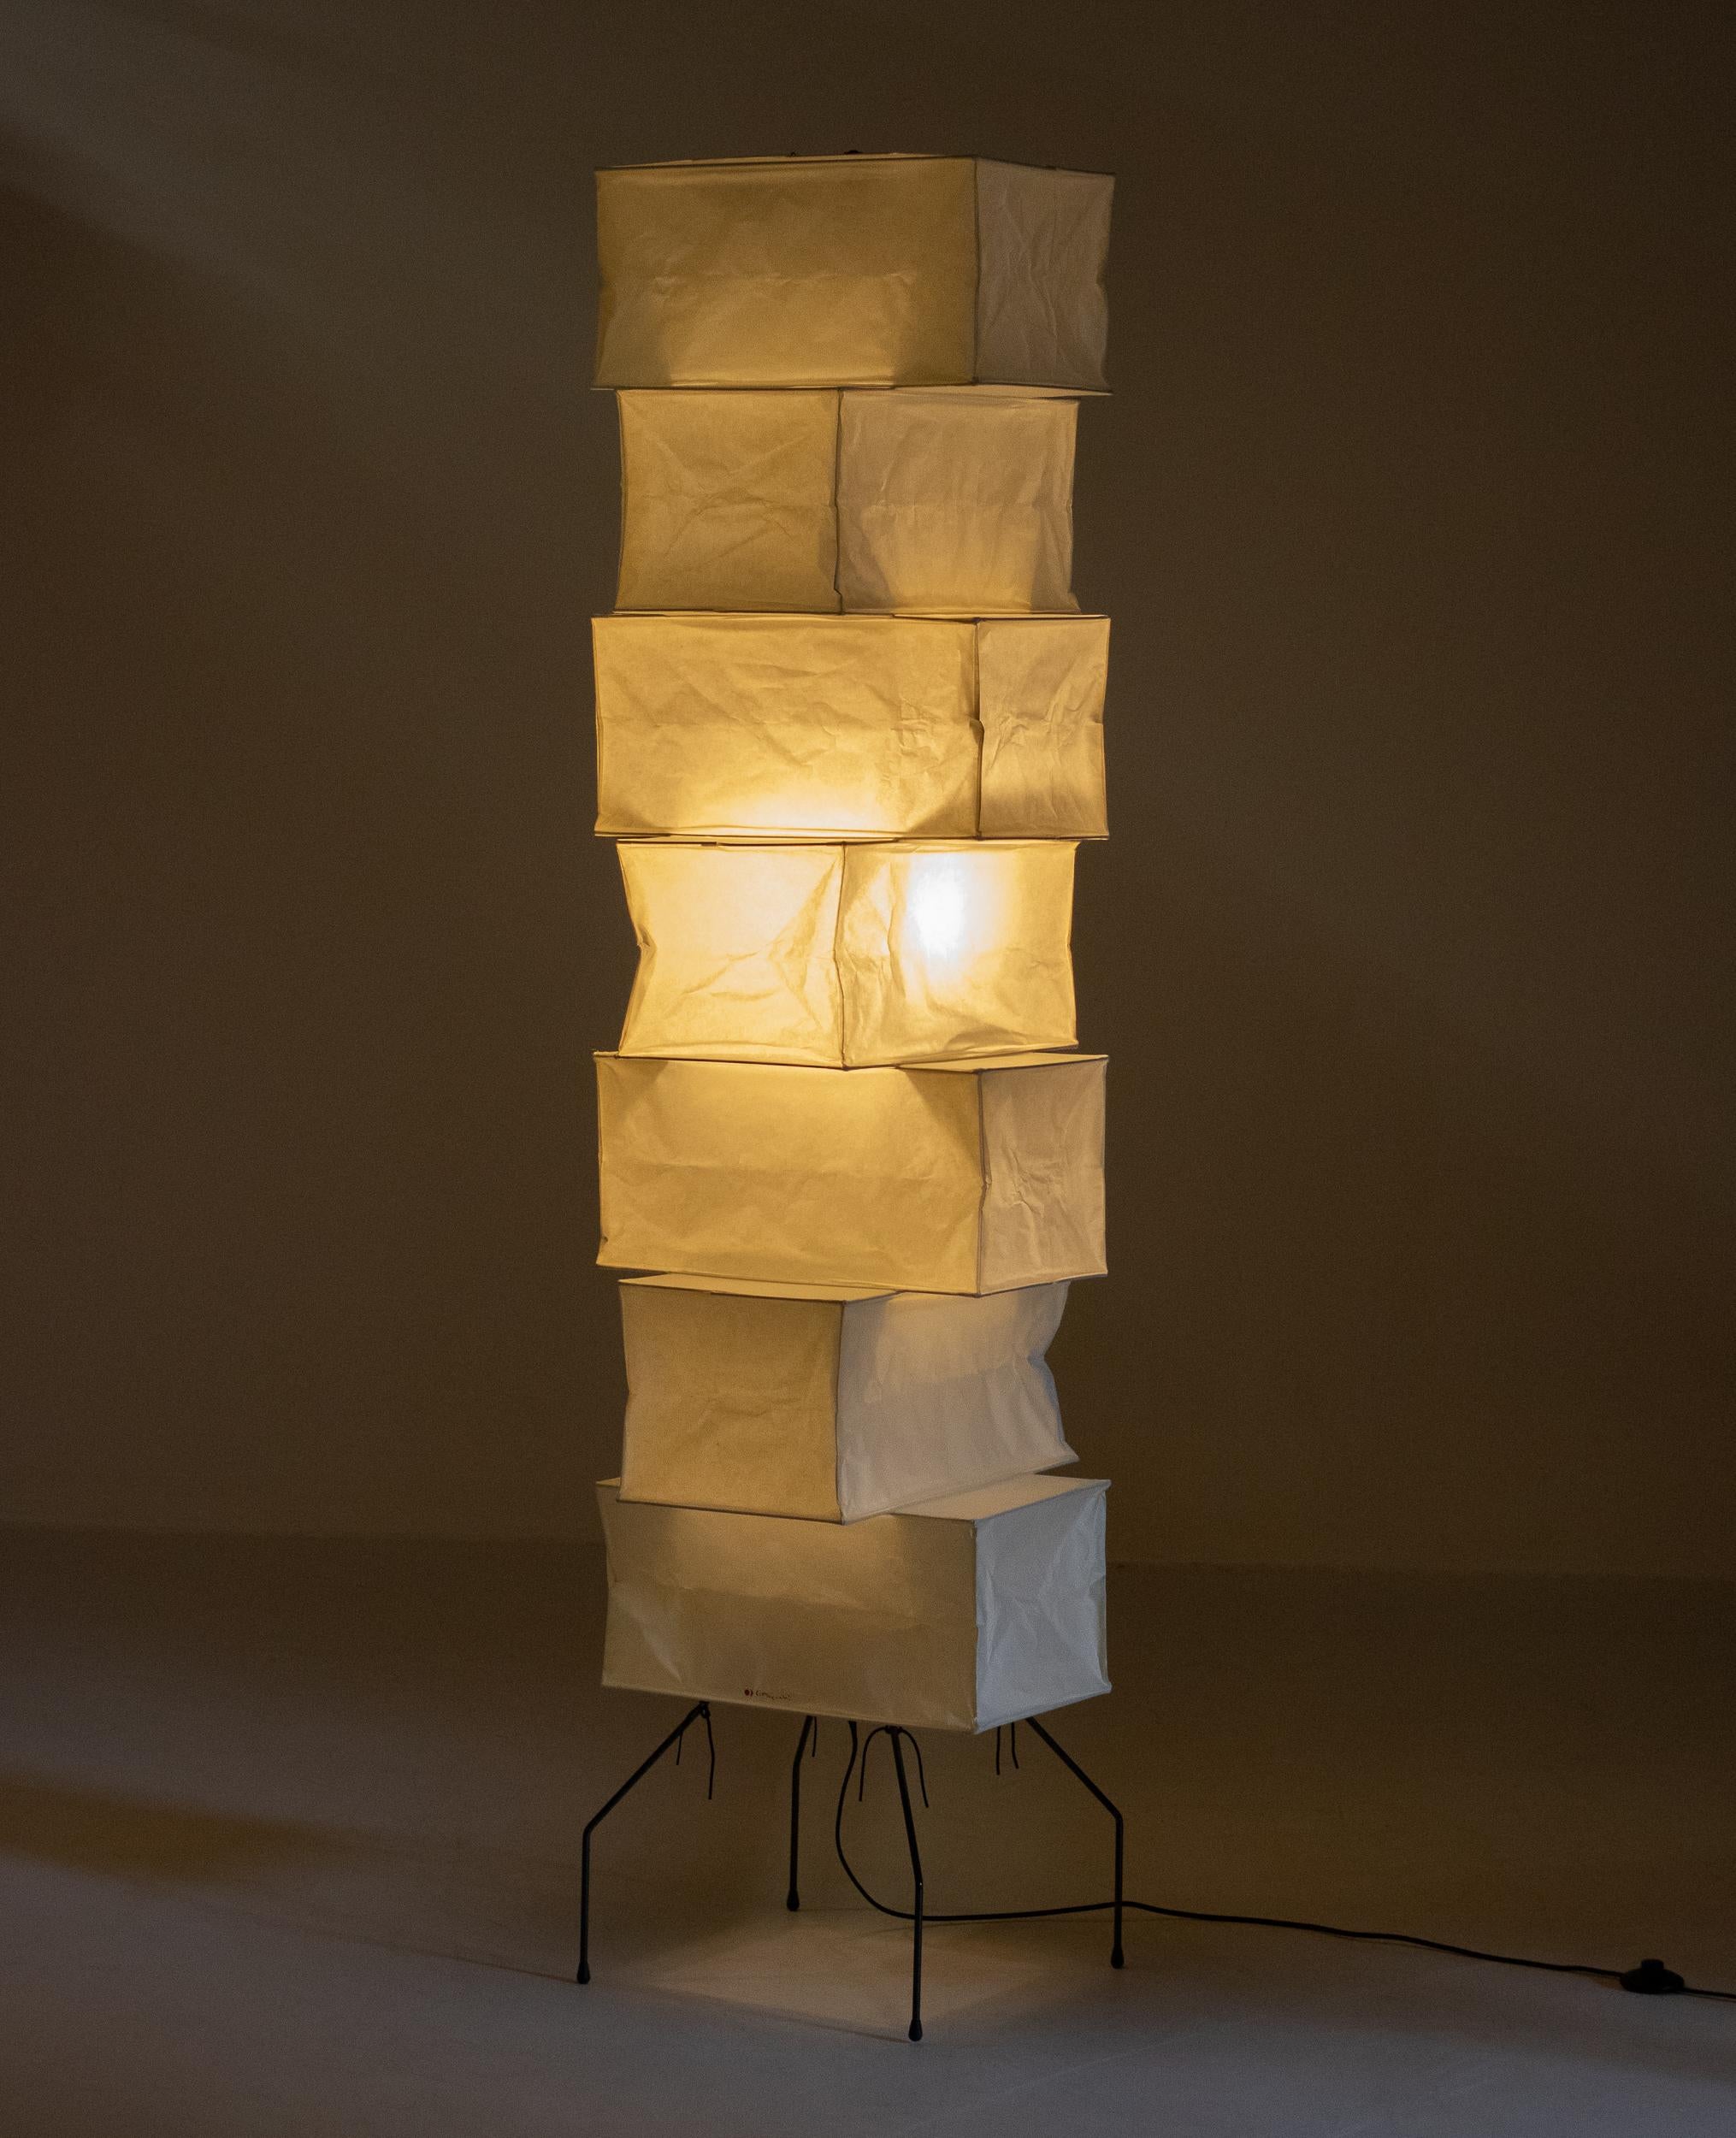 Akari UF4-L10 floor lamp designed by Isamu Noguchi, 1951. Manufactured by Ozeki & Co. in Japan. 
Bambu structure covered by washi paper supported by a coated metal base. Recent production, wired for U.S. standards. This fixture has one socket. We